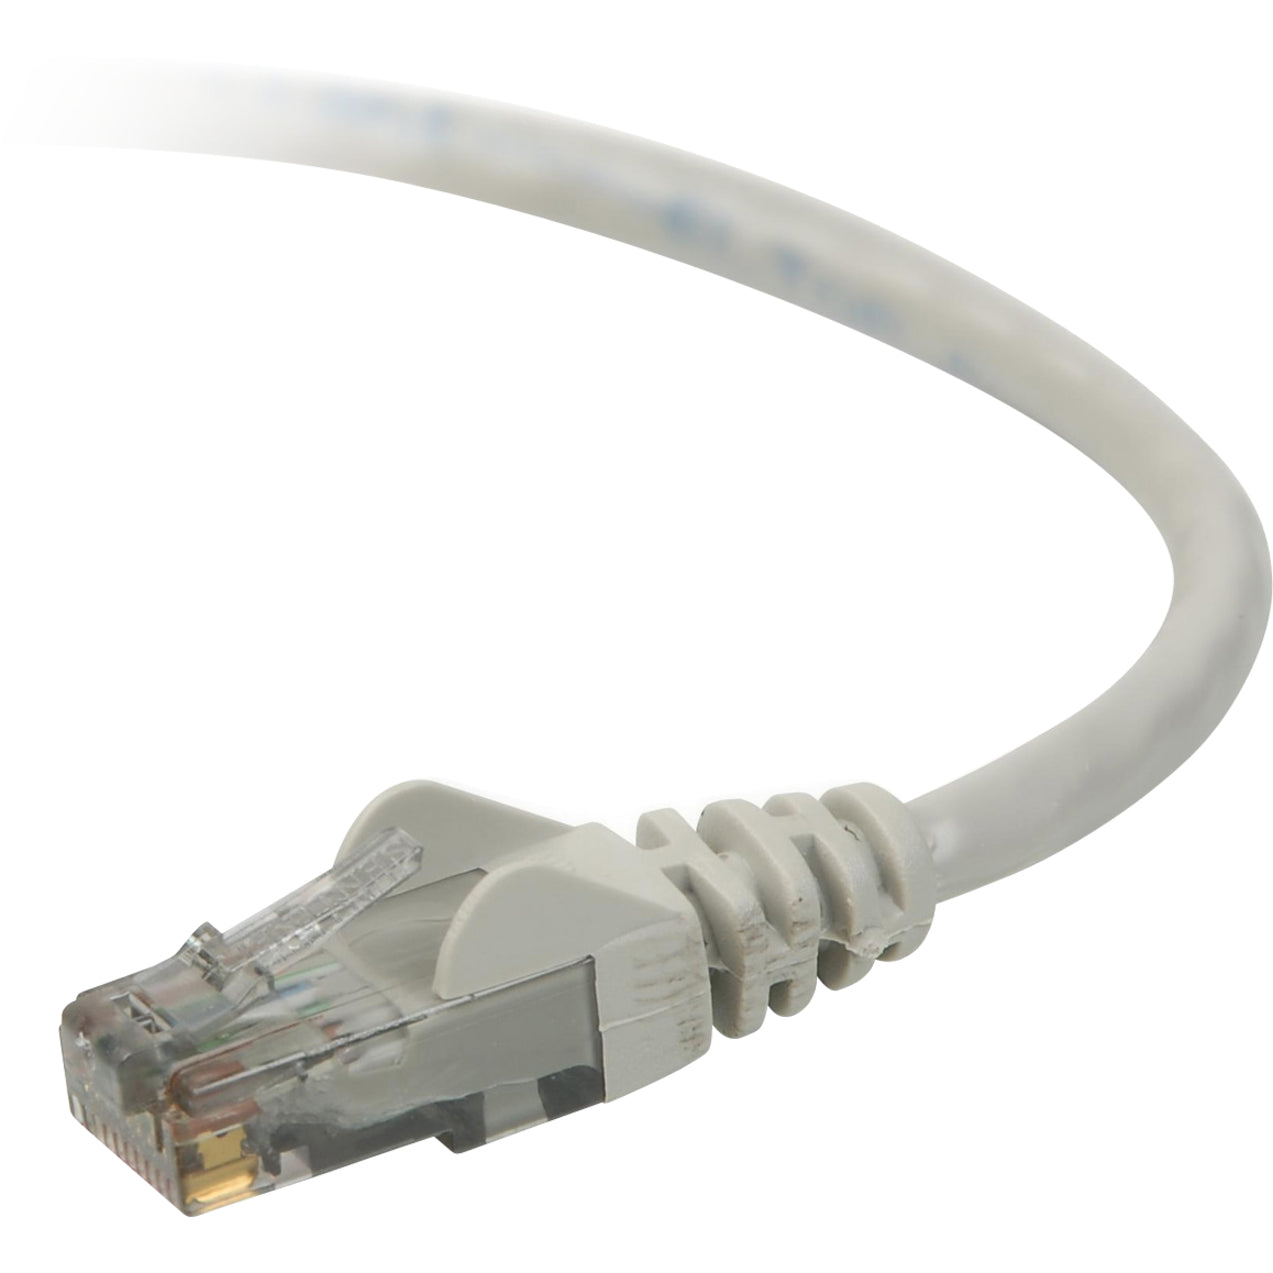 Belkin A3L980B25-S RJ45 Category 6 Snagless Patch Cable, 25 ft, Improved Transmission Performance